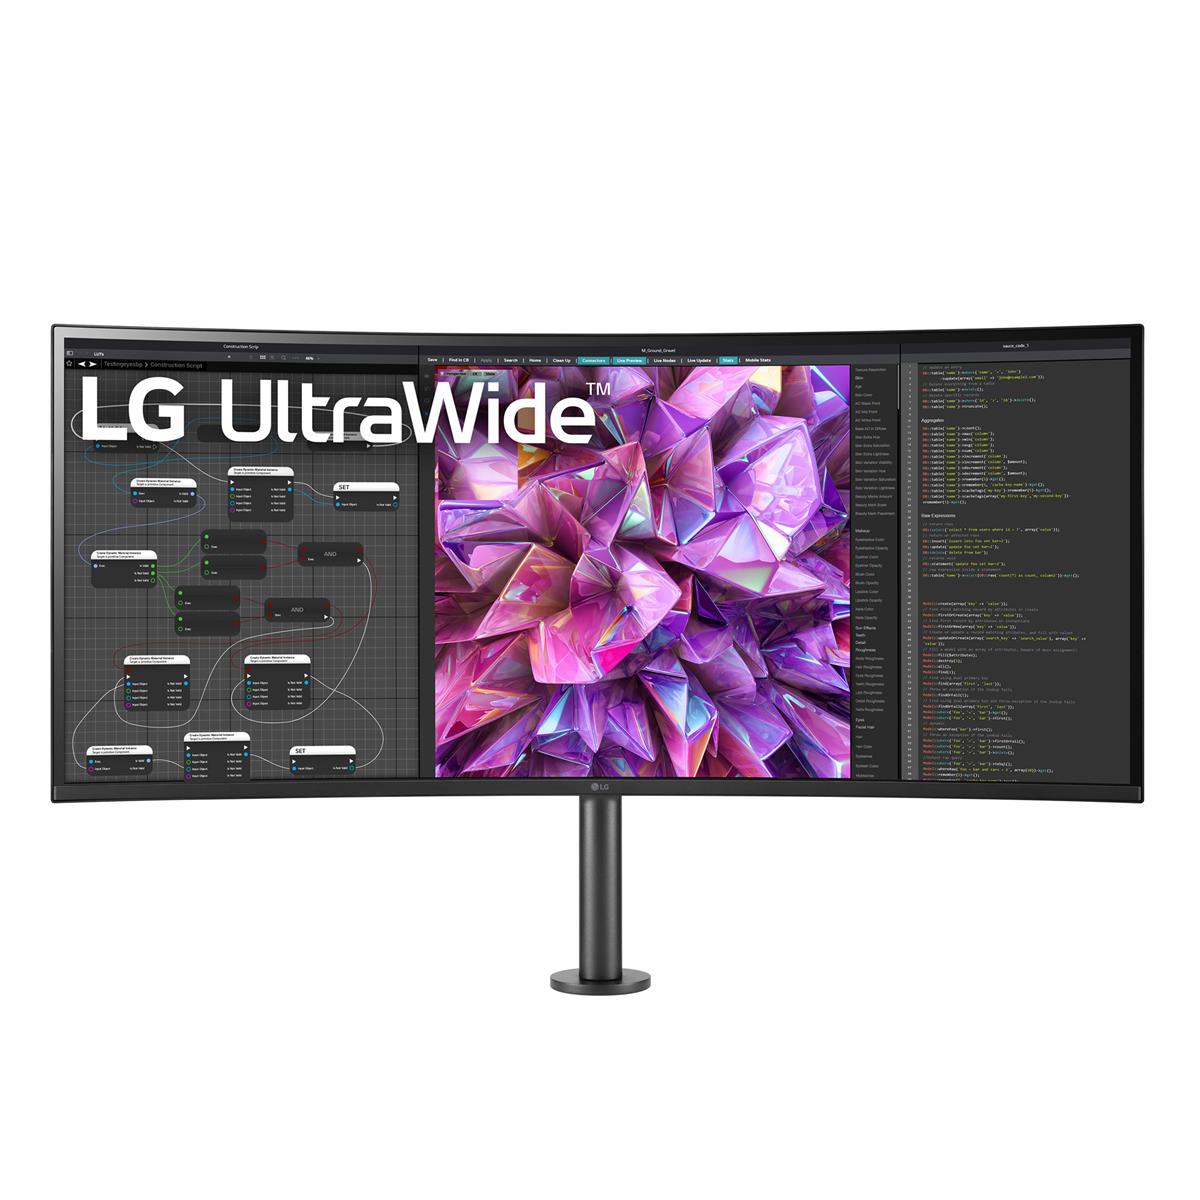 

LG 38WQ88C-W 38" 21:9 UltraWide QHD+ Curved IPS LCD HDR Monitor with Ergo Stand